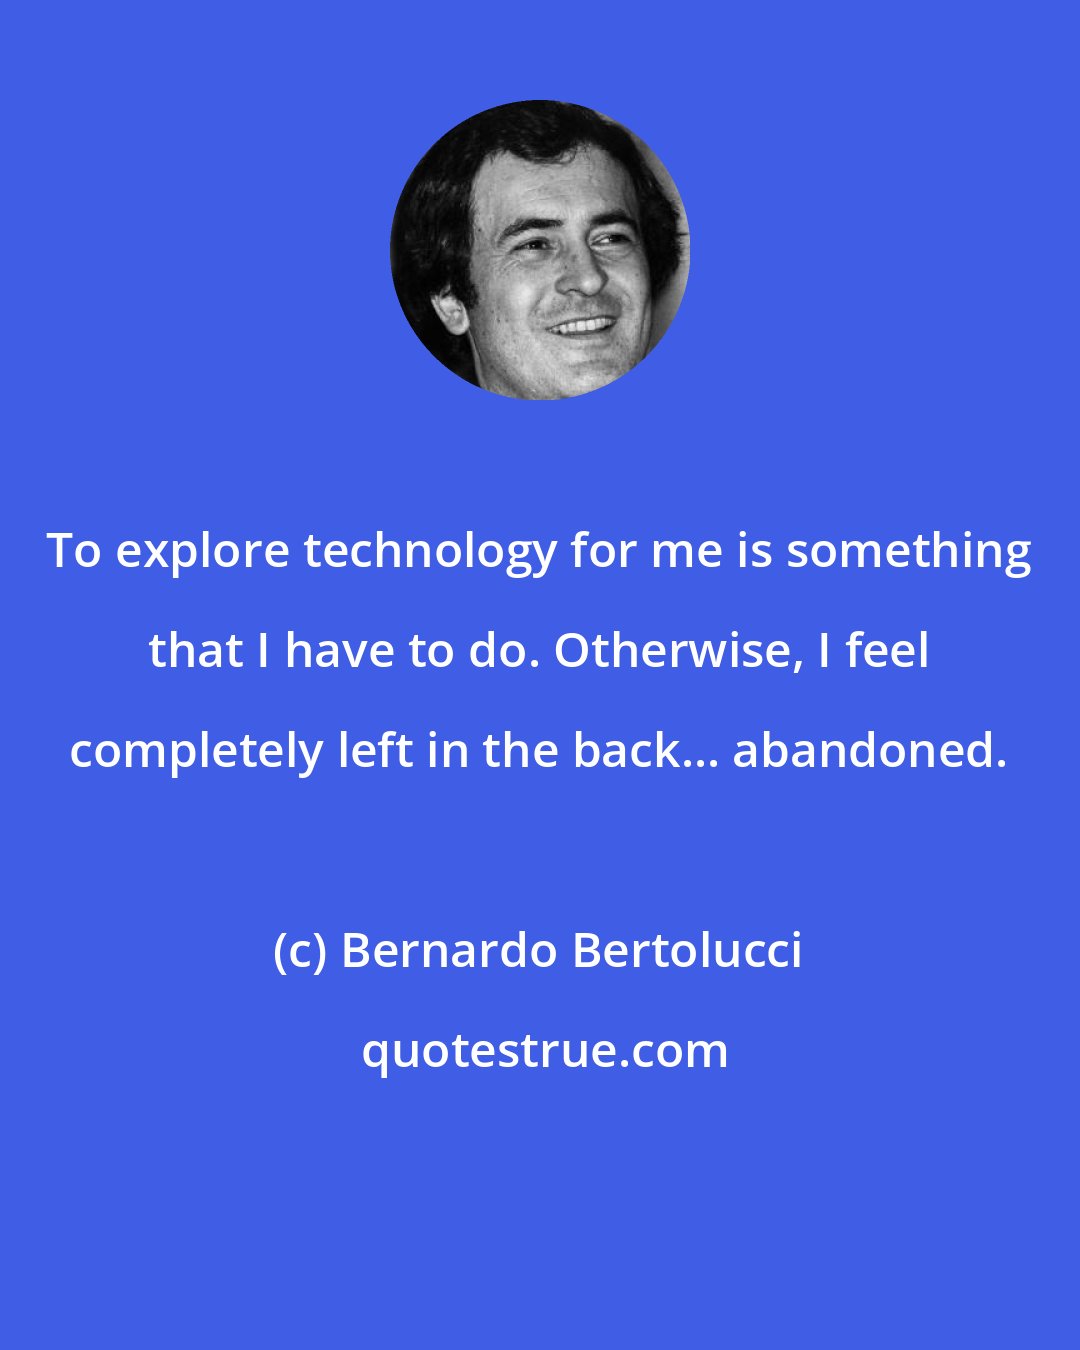 Bernardo Bertolucci: To explore technology for me is something that I have to do. Otherwise, I feel completely left in the back... abandoned.